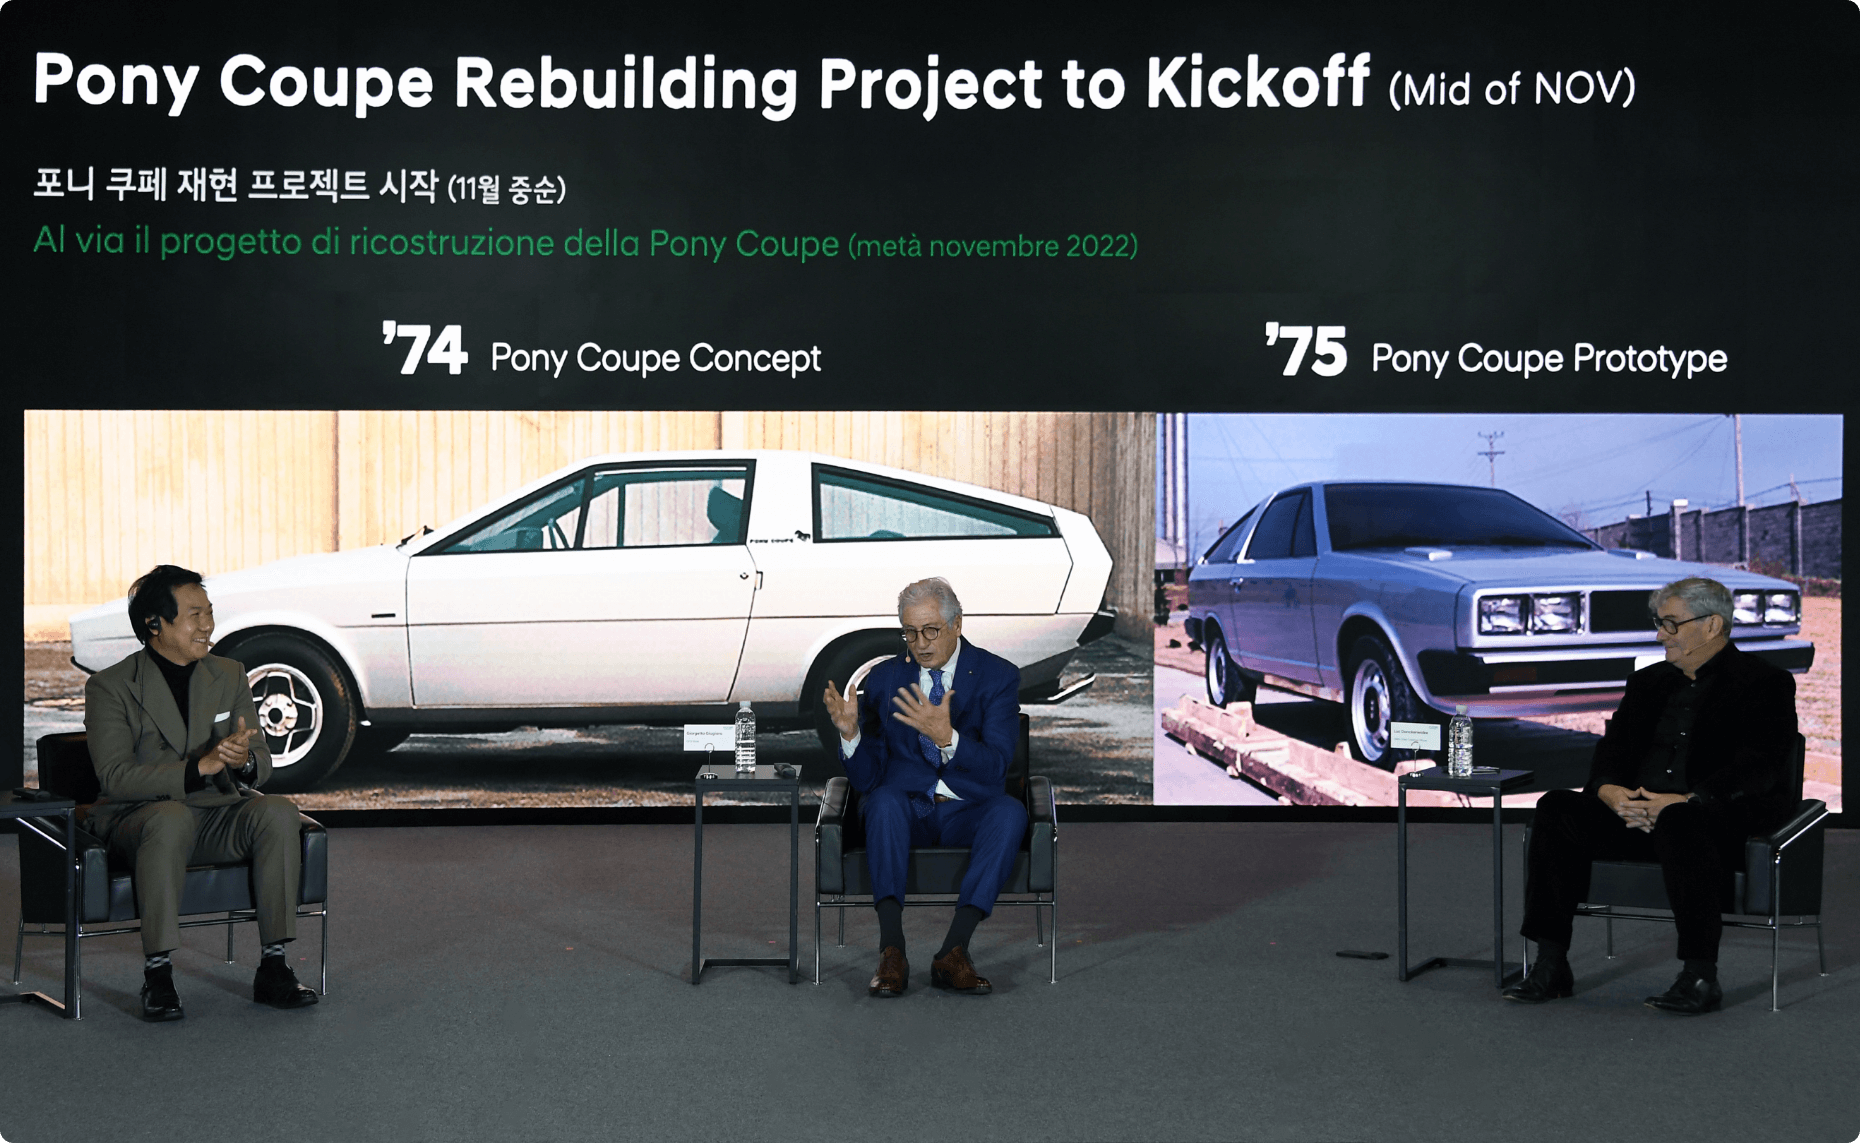 Giorgetto Giugiaro, Luc Donckerwolke, Chief Creative Officer of Hyundai Motor Group, and Sang-yup Lee, Executive Vice President and Head of Hyundai Motor's Global Design Center, talking about the Pony Coupe Restoration Project in a design talk show.